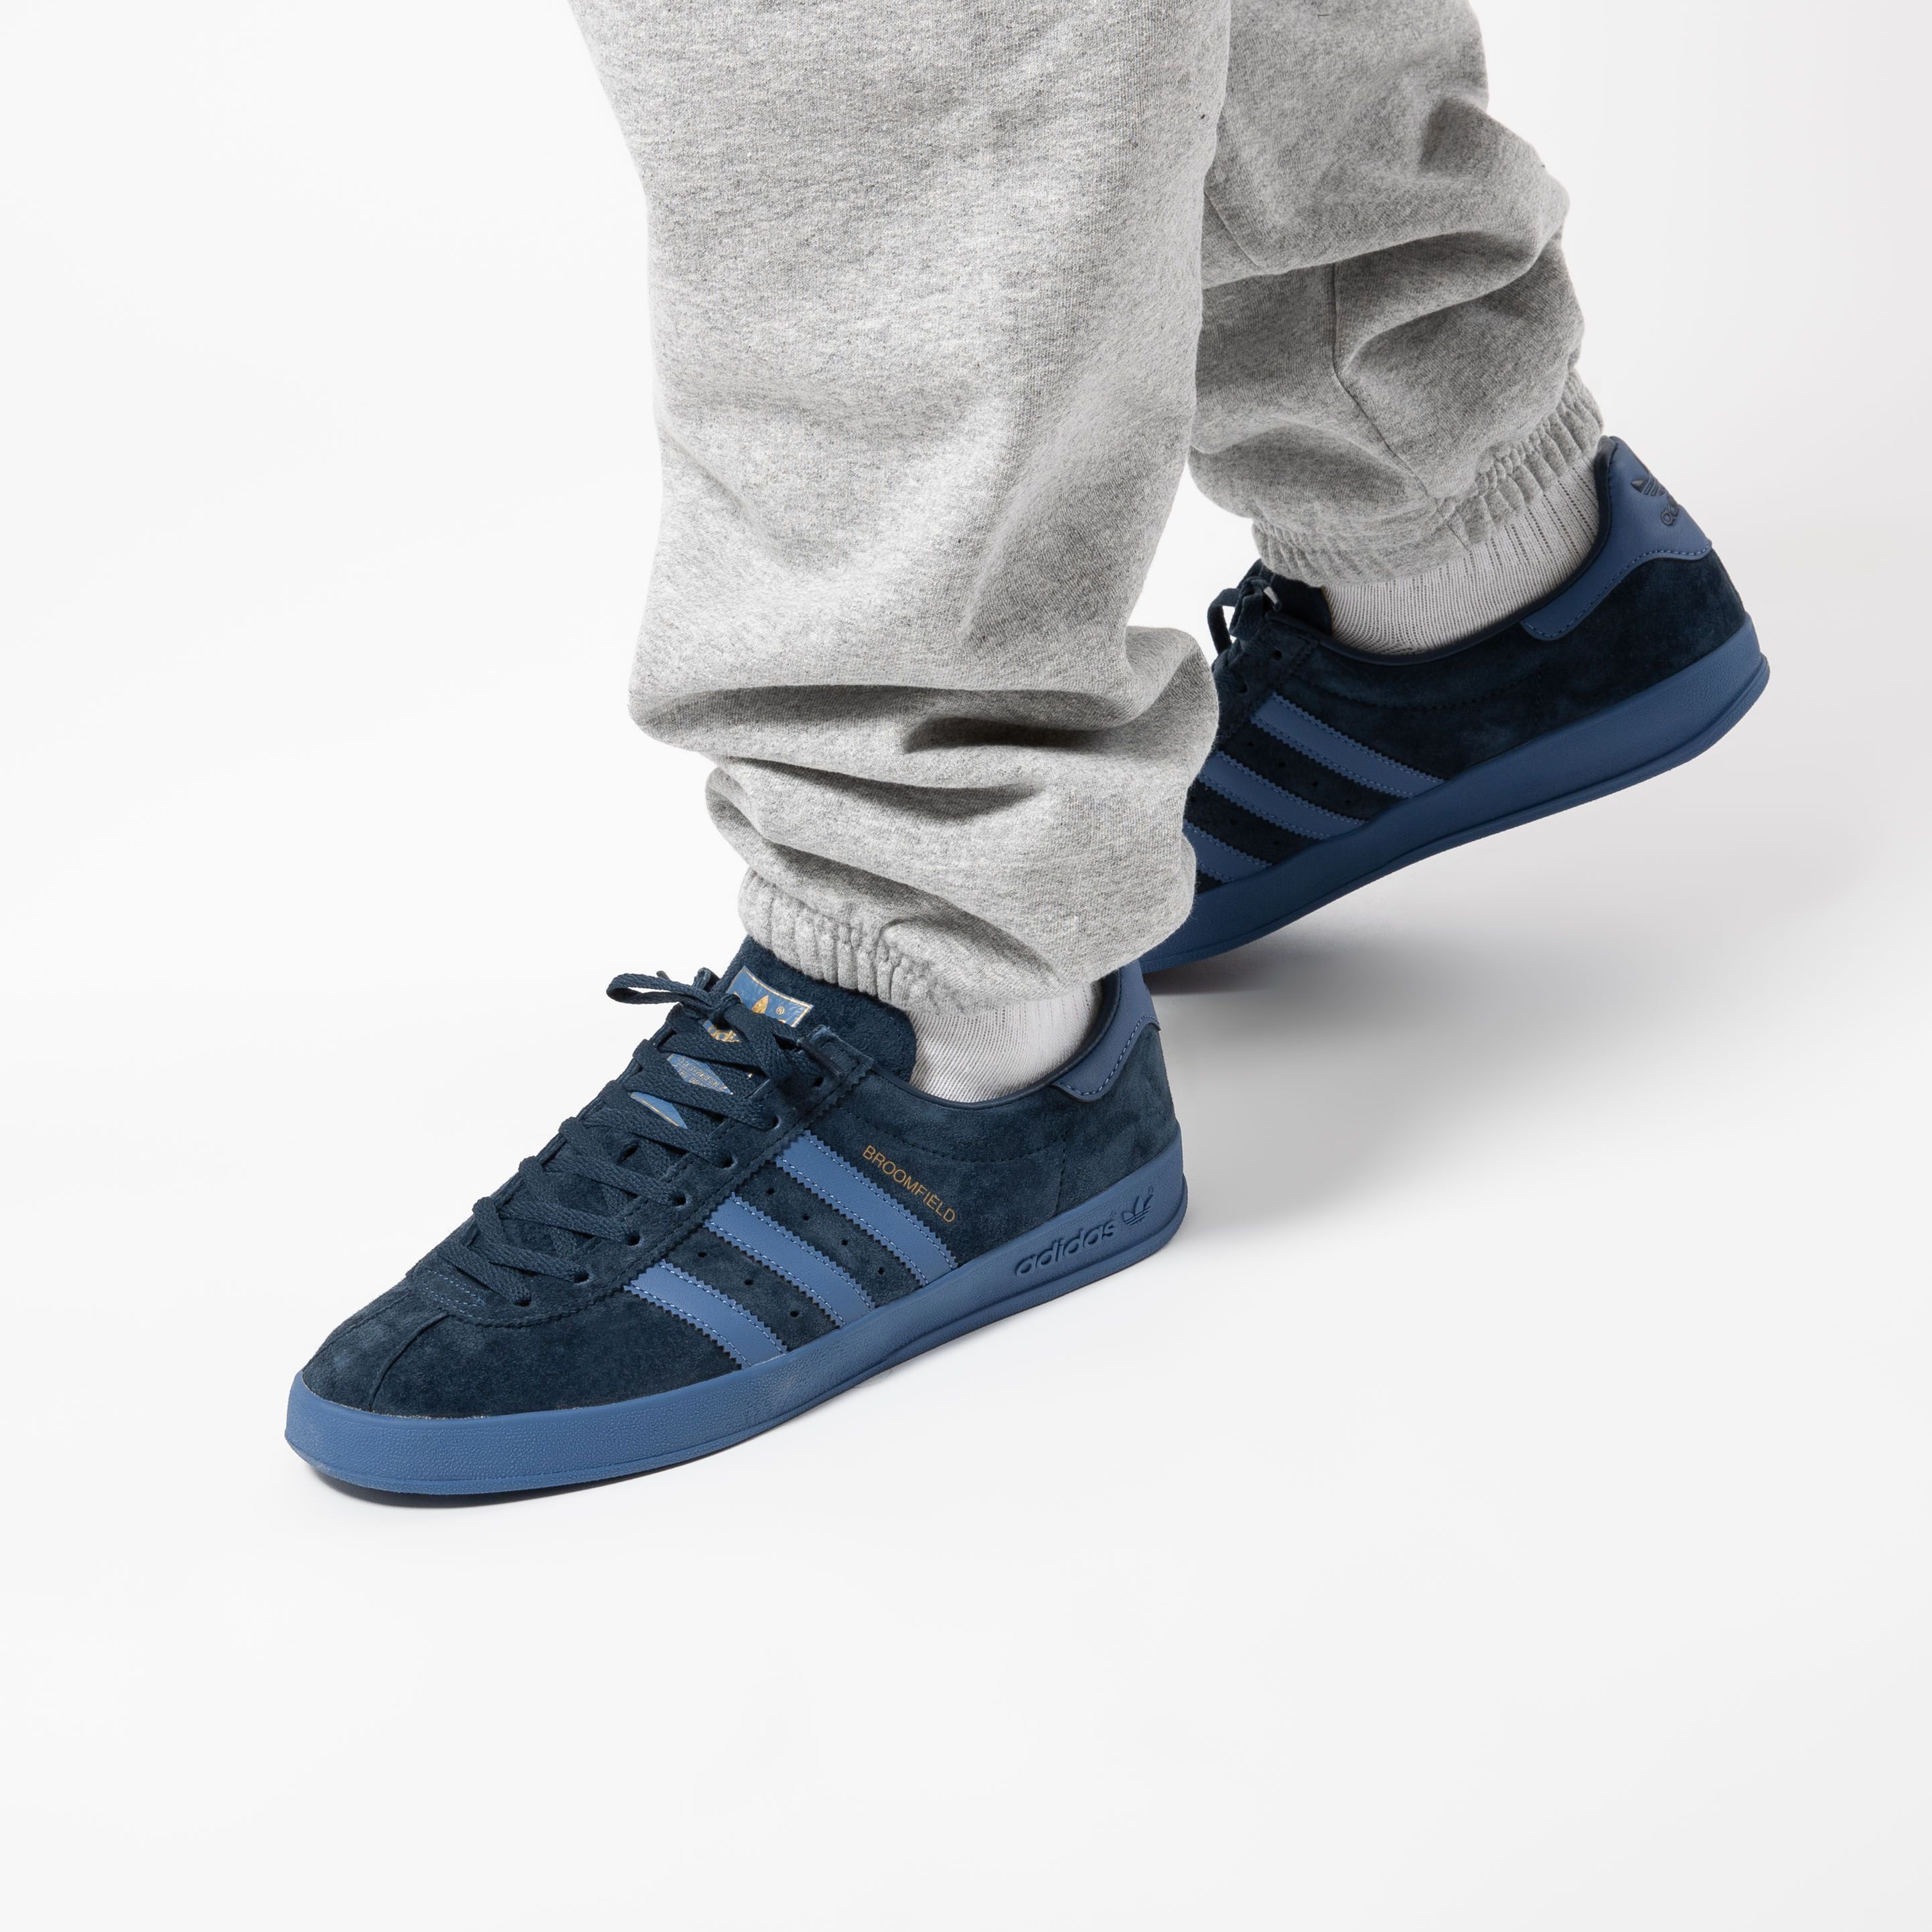 Orbita contraste Ajuste Titolo on Twitter: "just in. discover these 3-Stripes retro trainers 🔵 the adidas  Broomfield "Cream Navy" are now available online. this way ➡️  https://t.co/QFEEprAWc0 UK 6.5 (40) - UK 11 (46) style